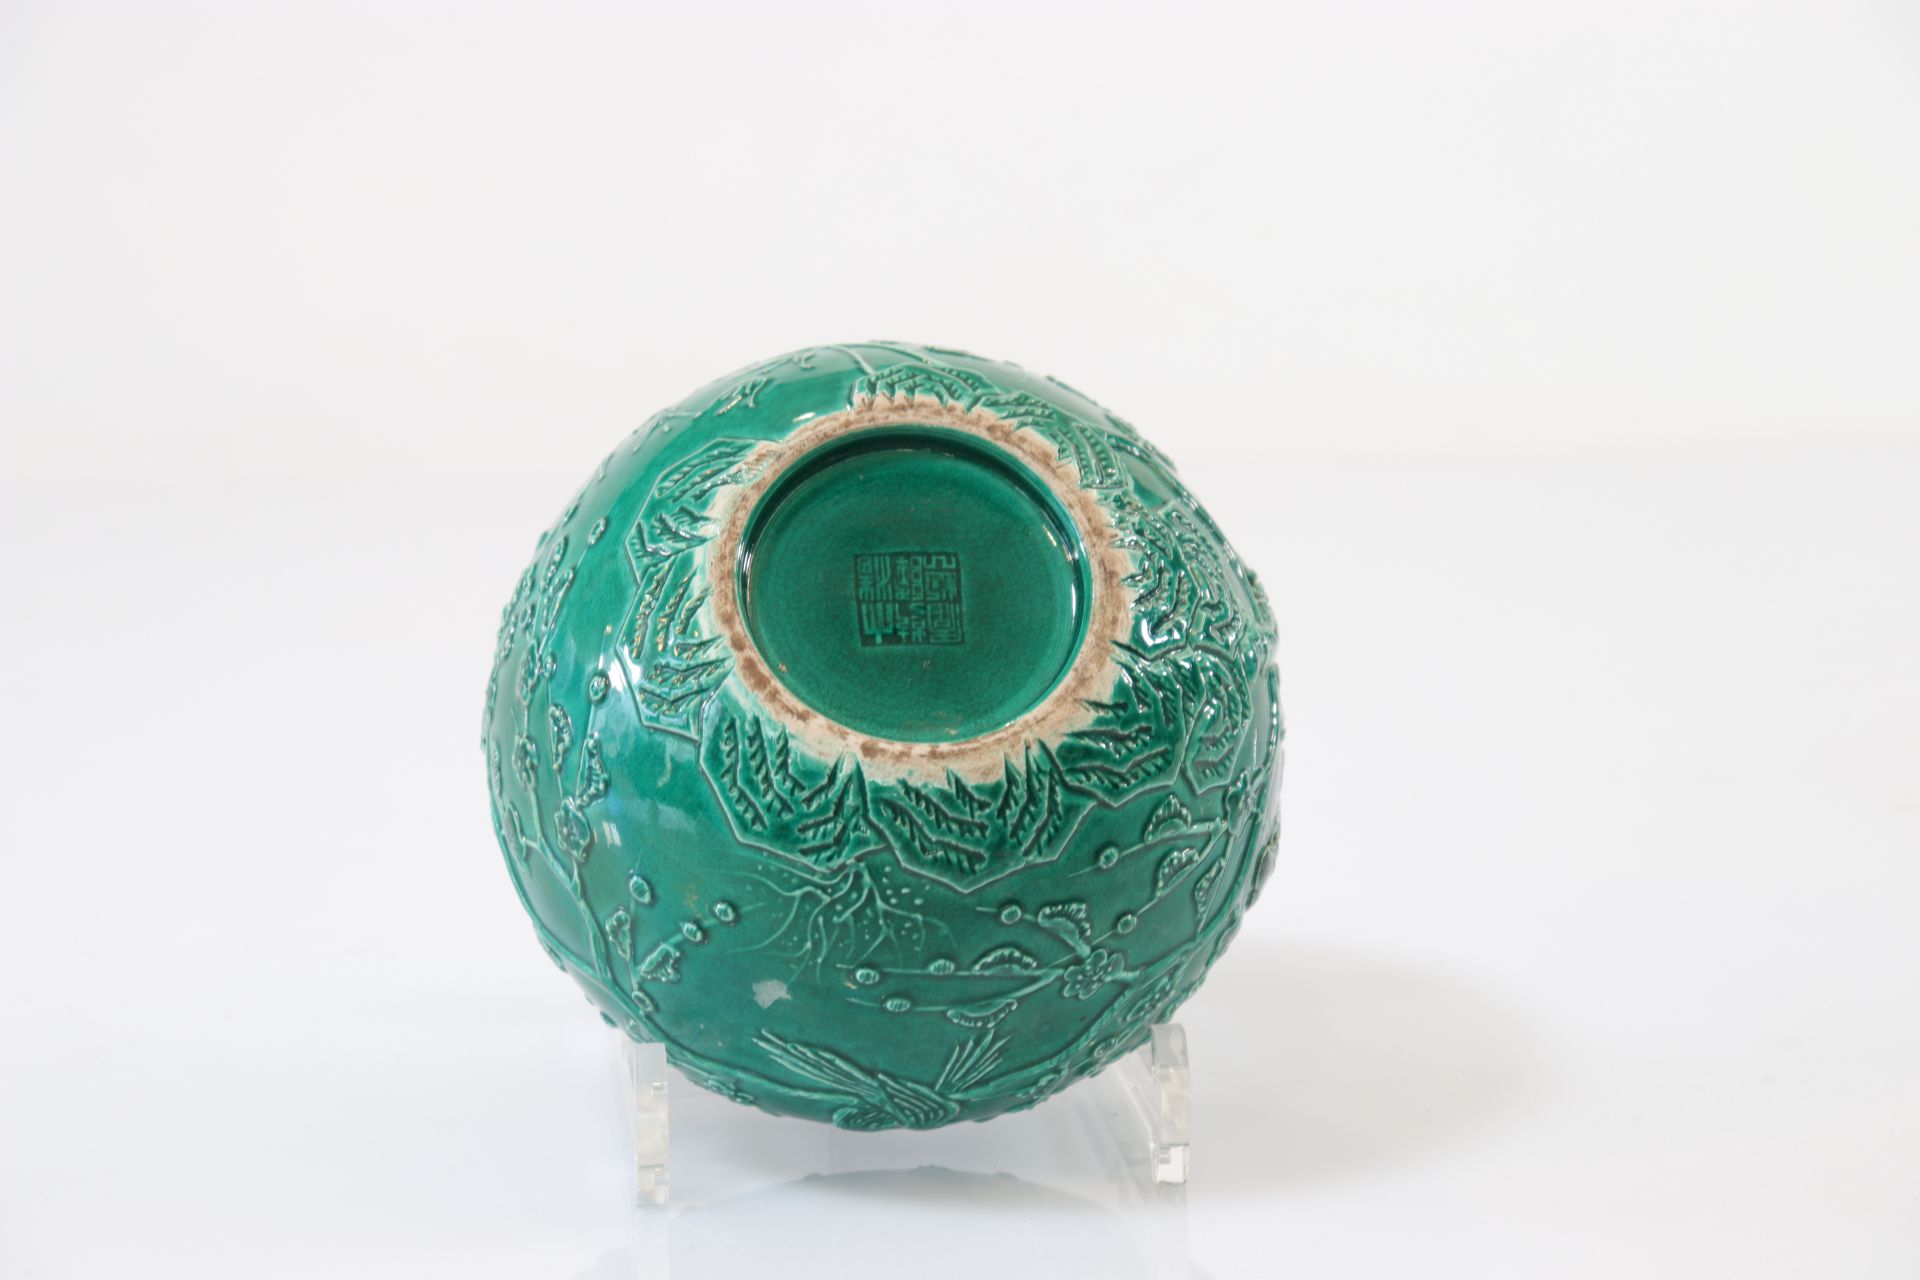 Chinese green porcelain vase with floral decoration marked under the piece - Image 4 of 4